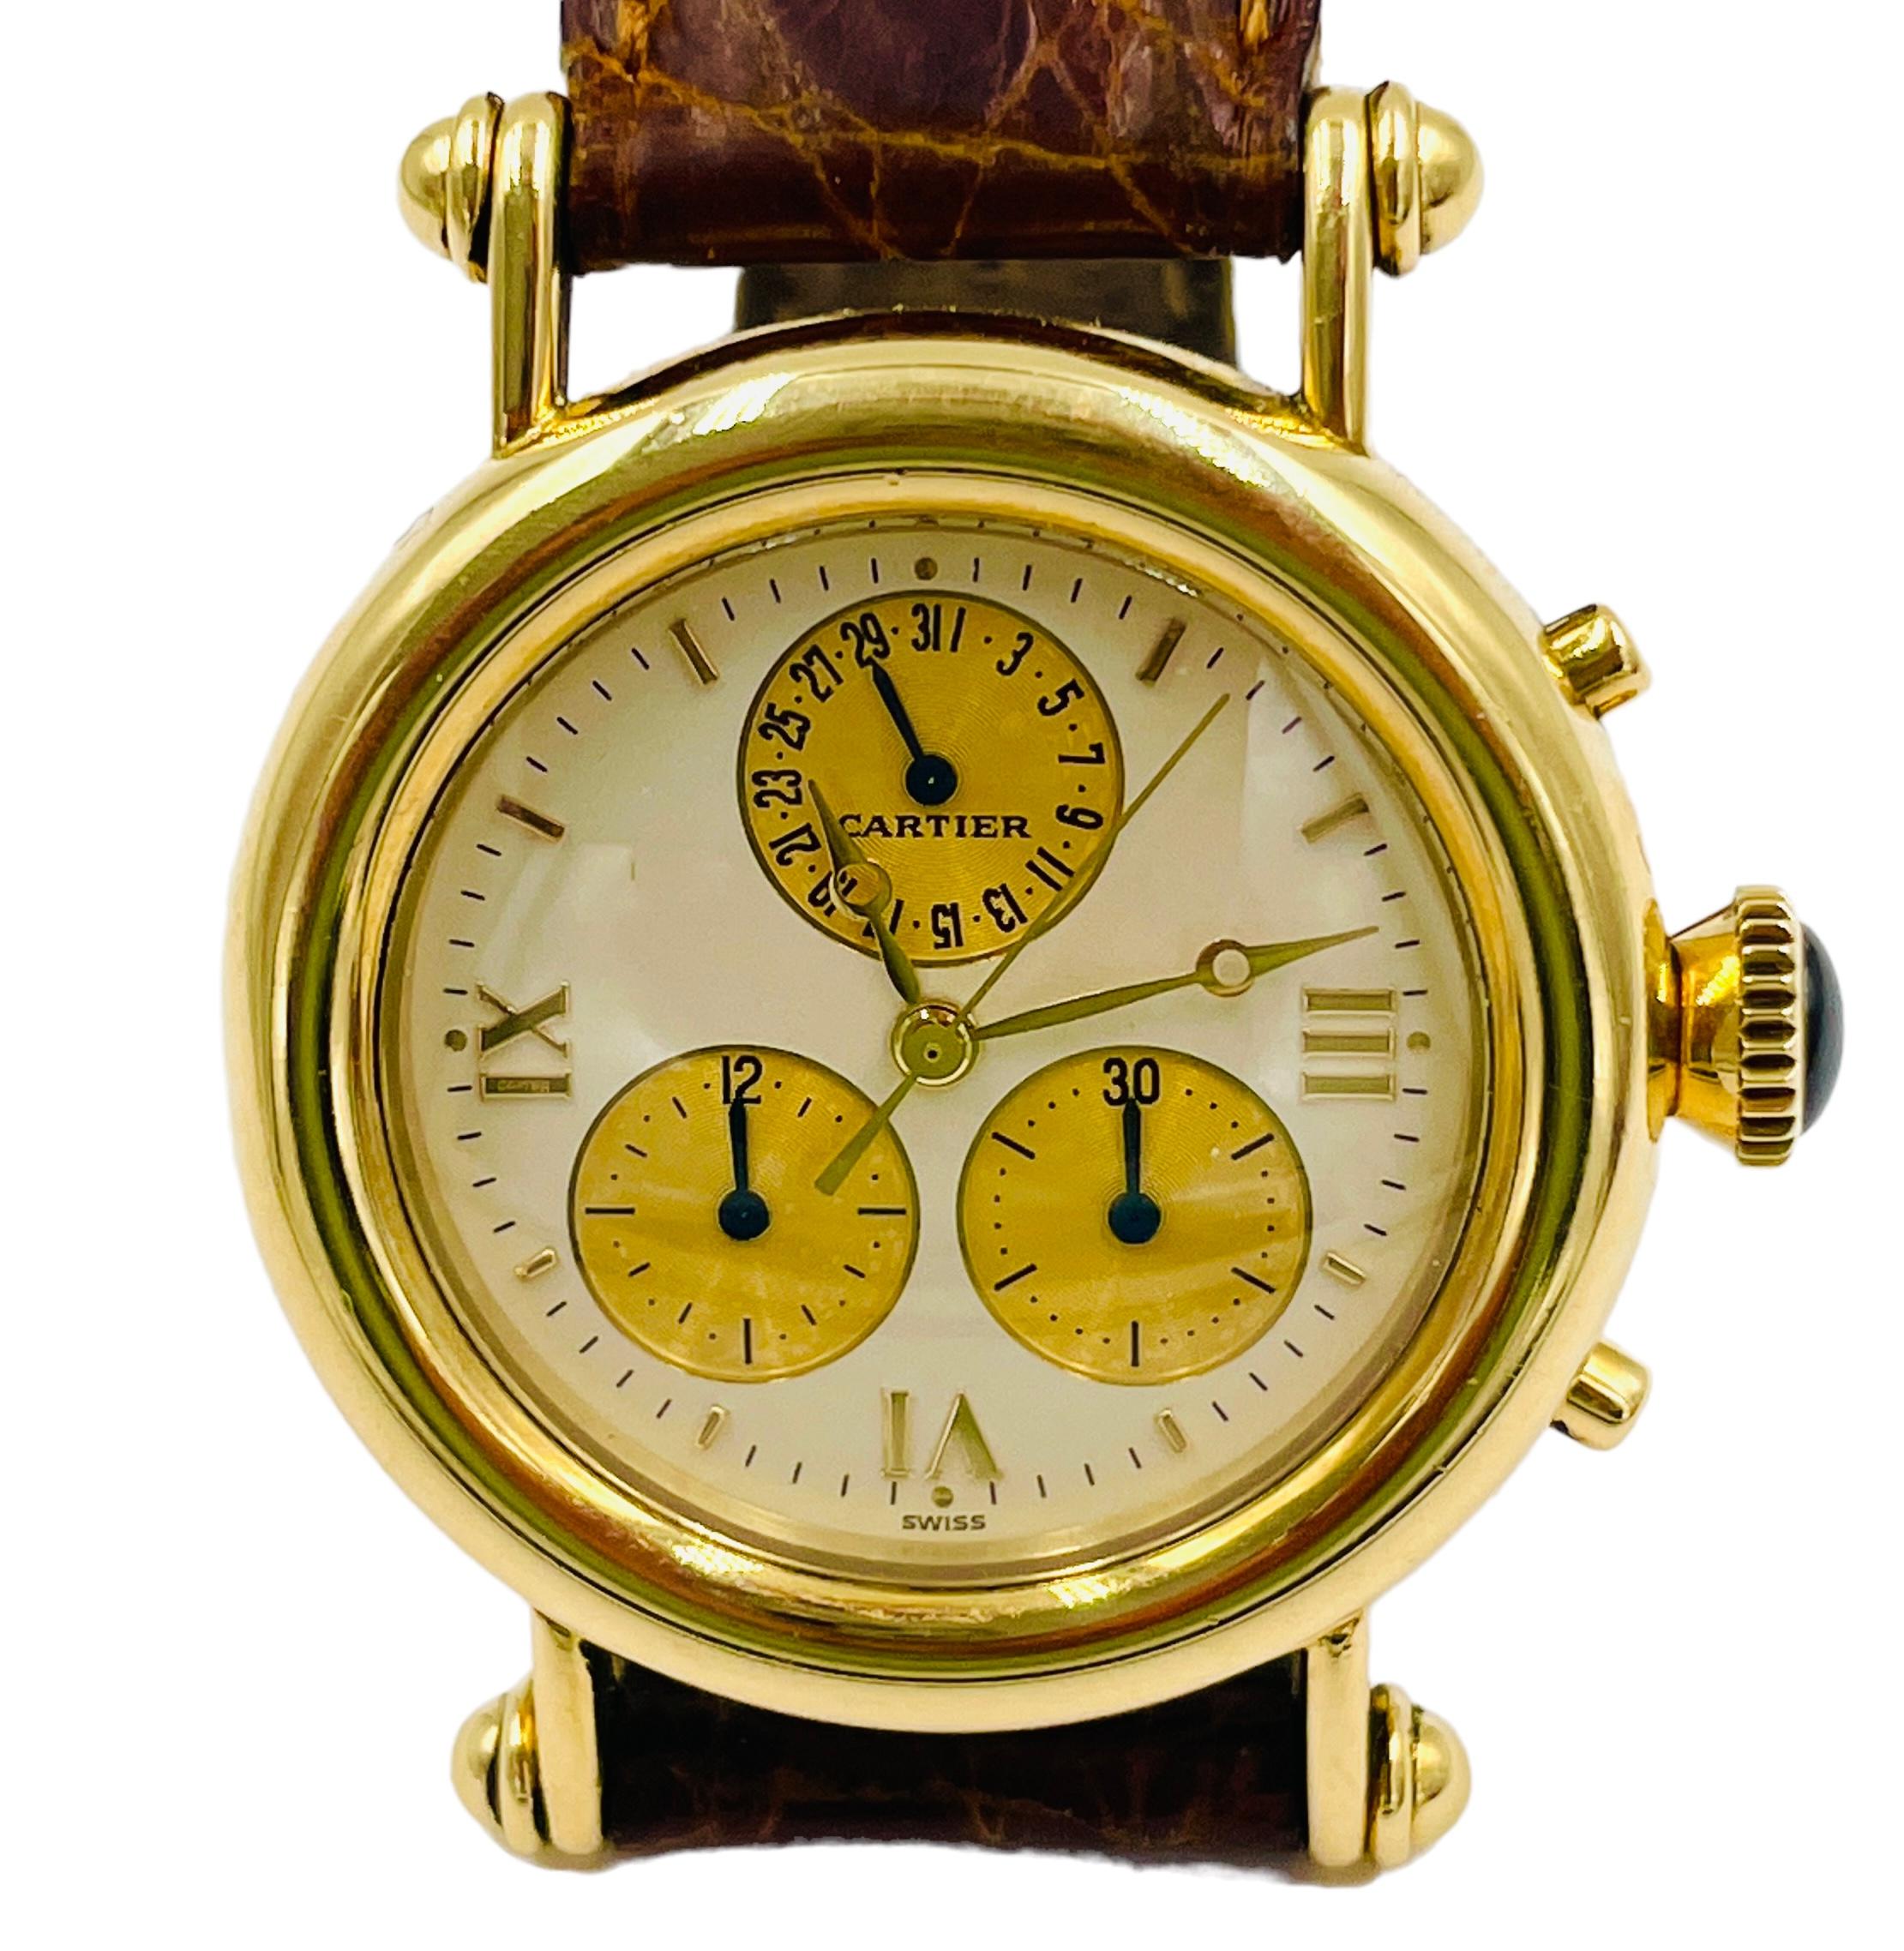 Cartier Diabolo Chronograph Yellow Gold Wristwatch.

ABOUT THIS ITEM: Cartier diabolo chronograph 18k yellow gold wristwatch with leather strap and original Cartier 18k yellow gold buckle.

SPECIFICATIONS: CRDJ2

METAL:  18k yellow gold case and